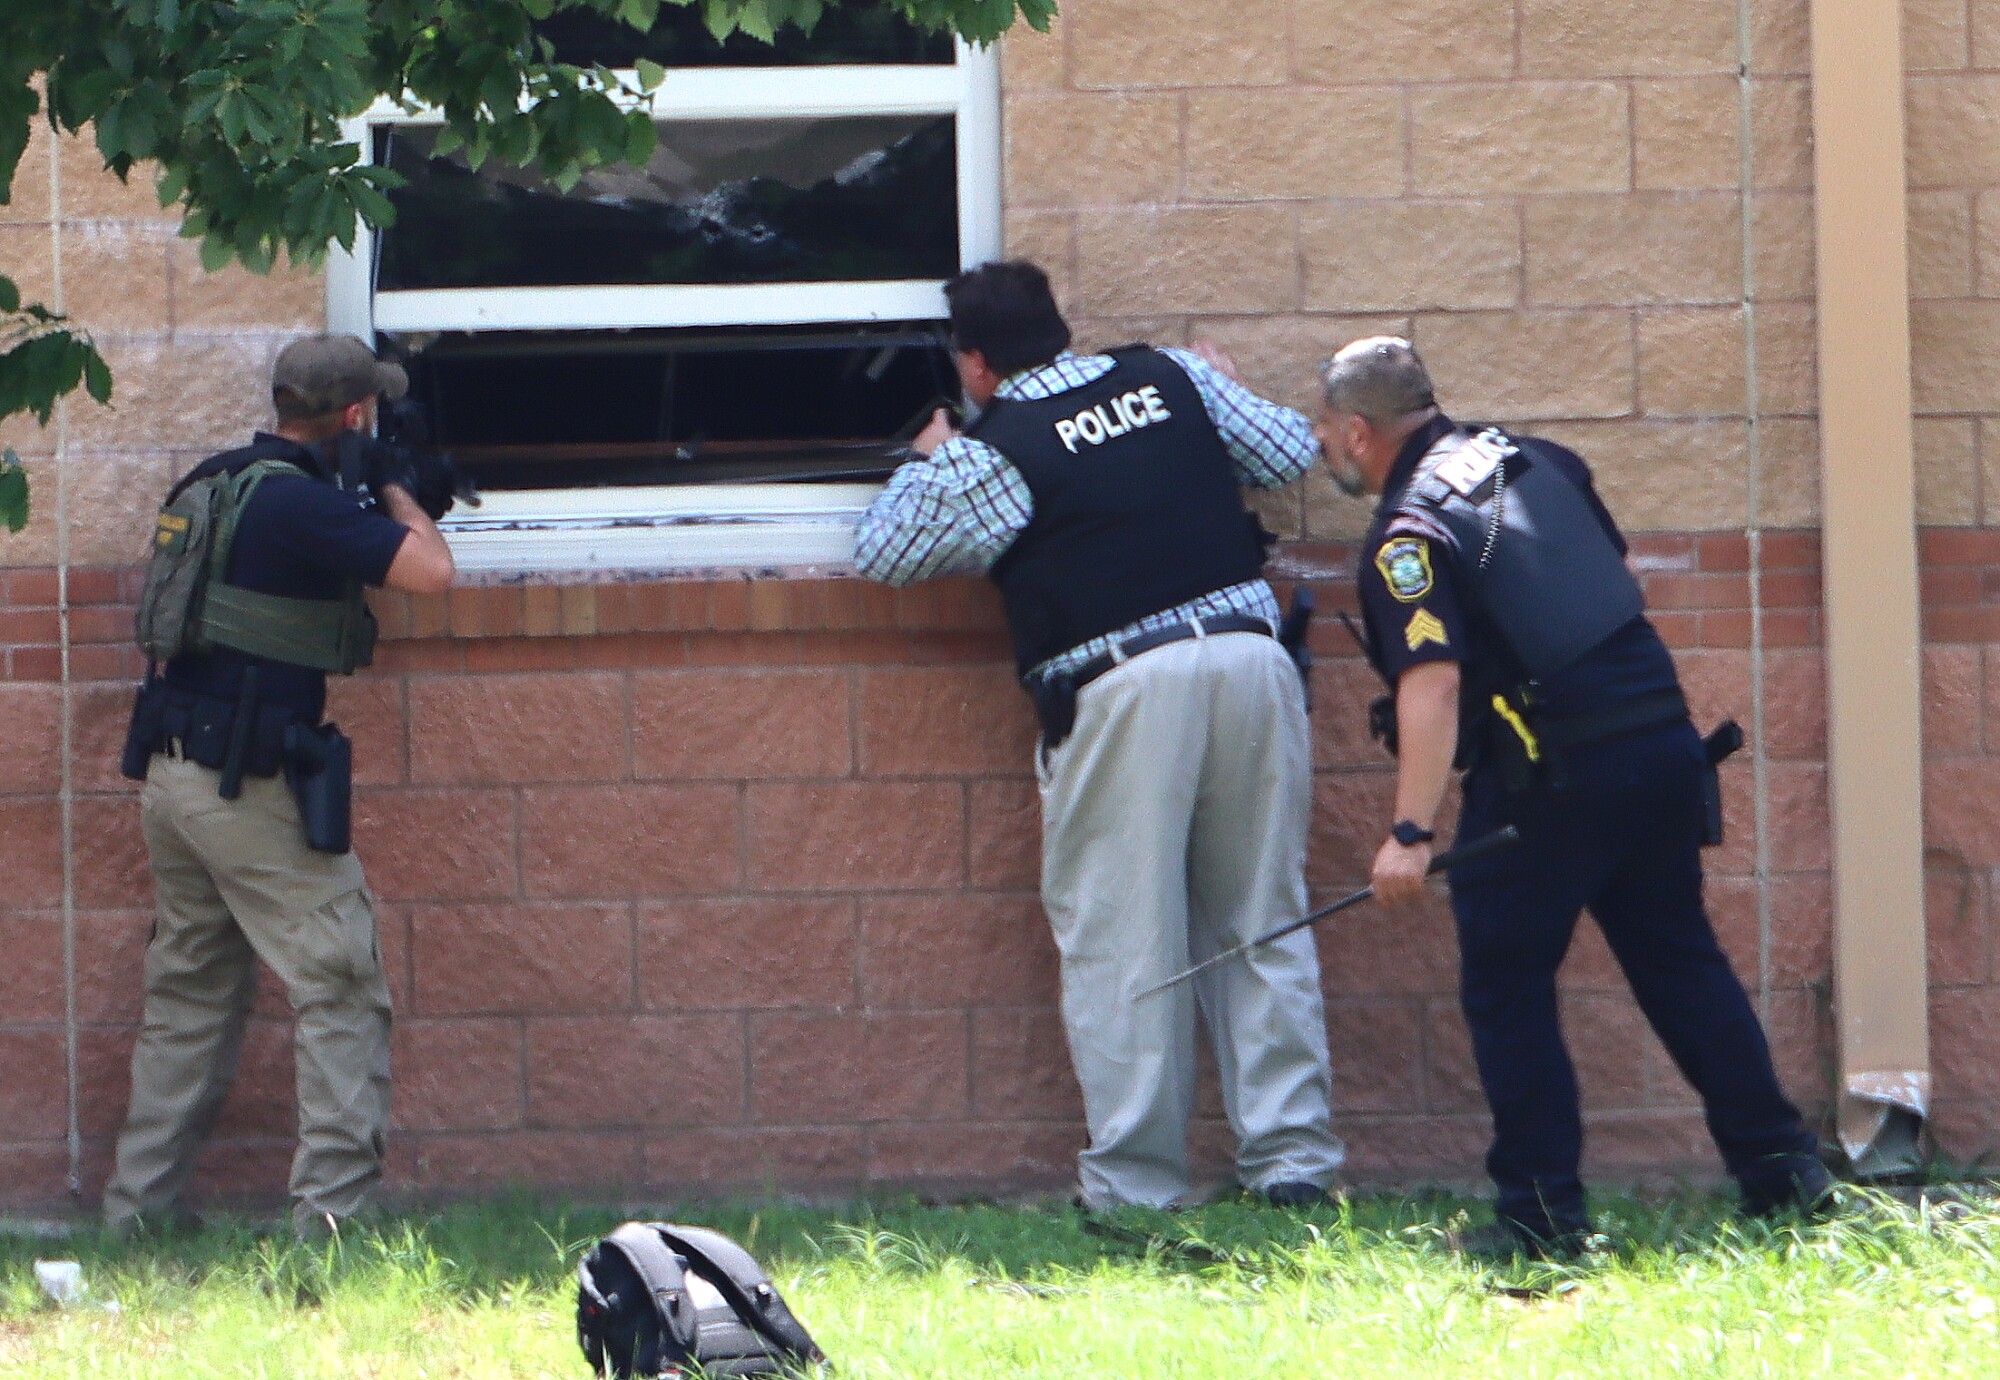 Police with guns drawn peer in a window at Robb Elementary School on the day of the shooting.